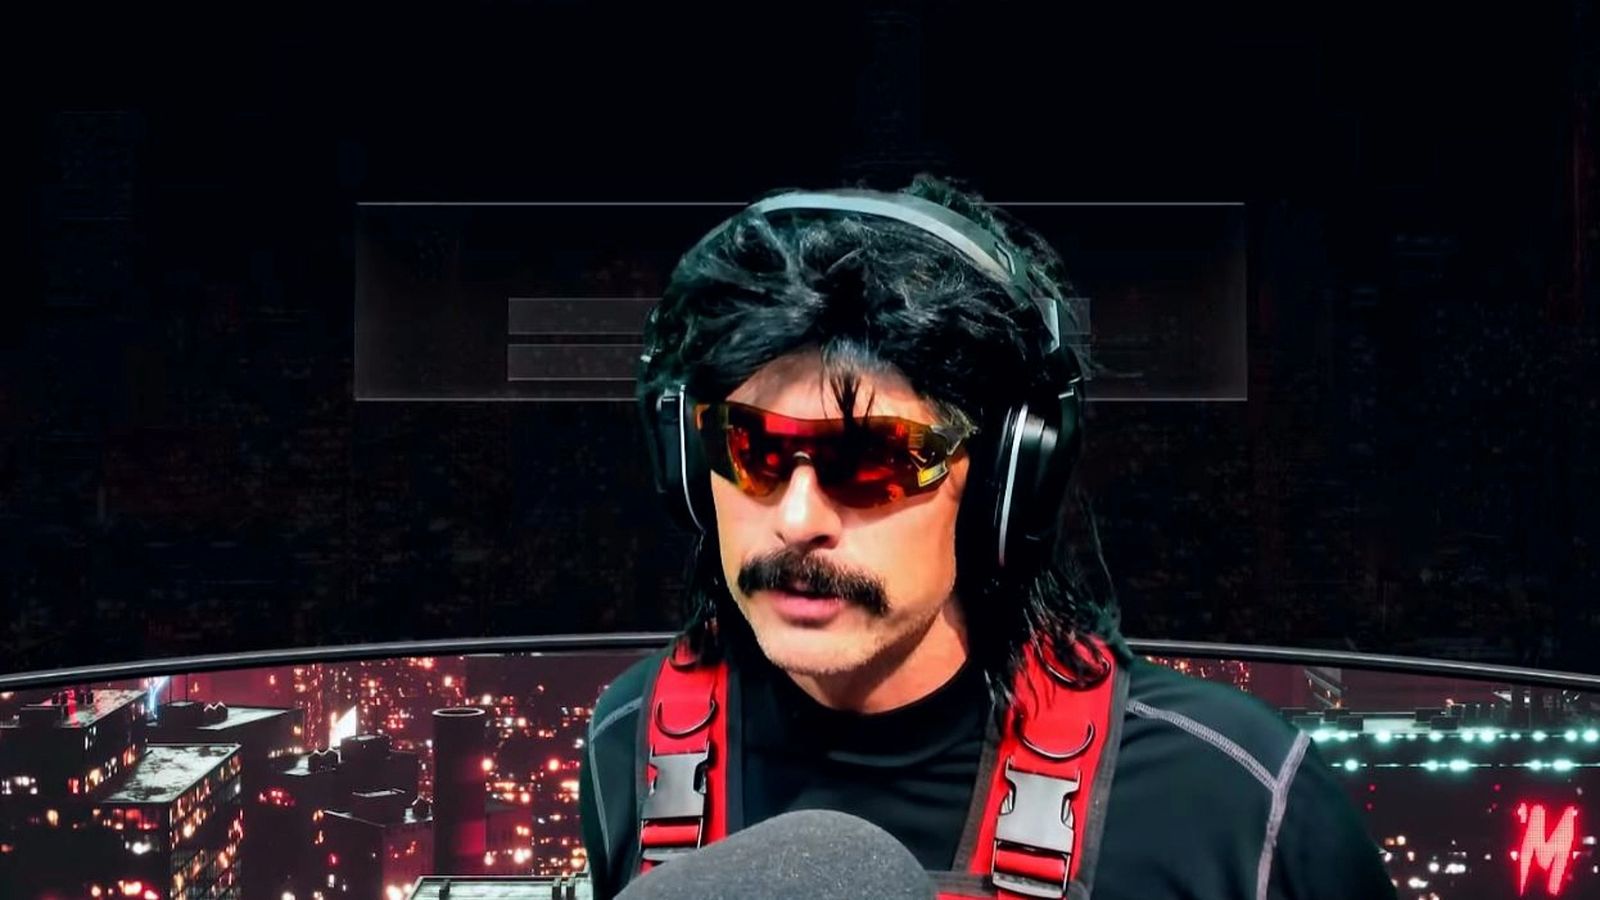 Dr Disrespect in front of a red and black background